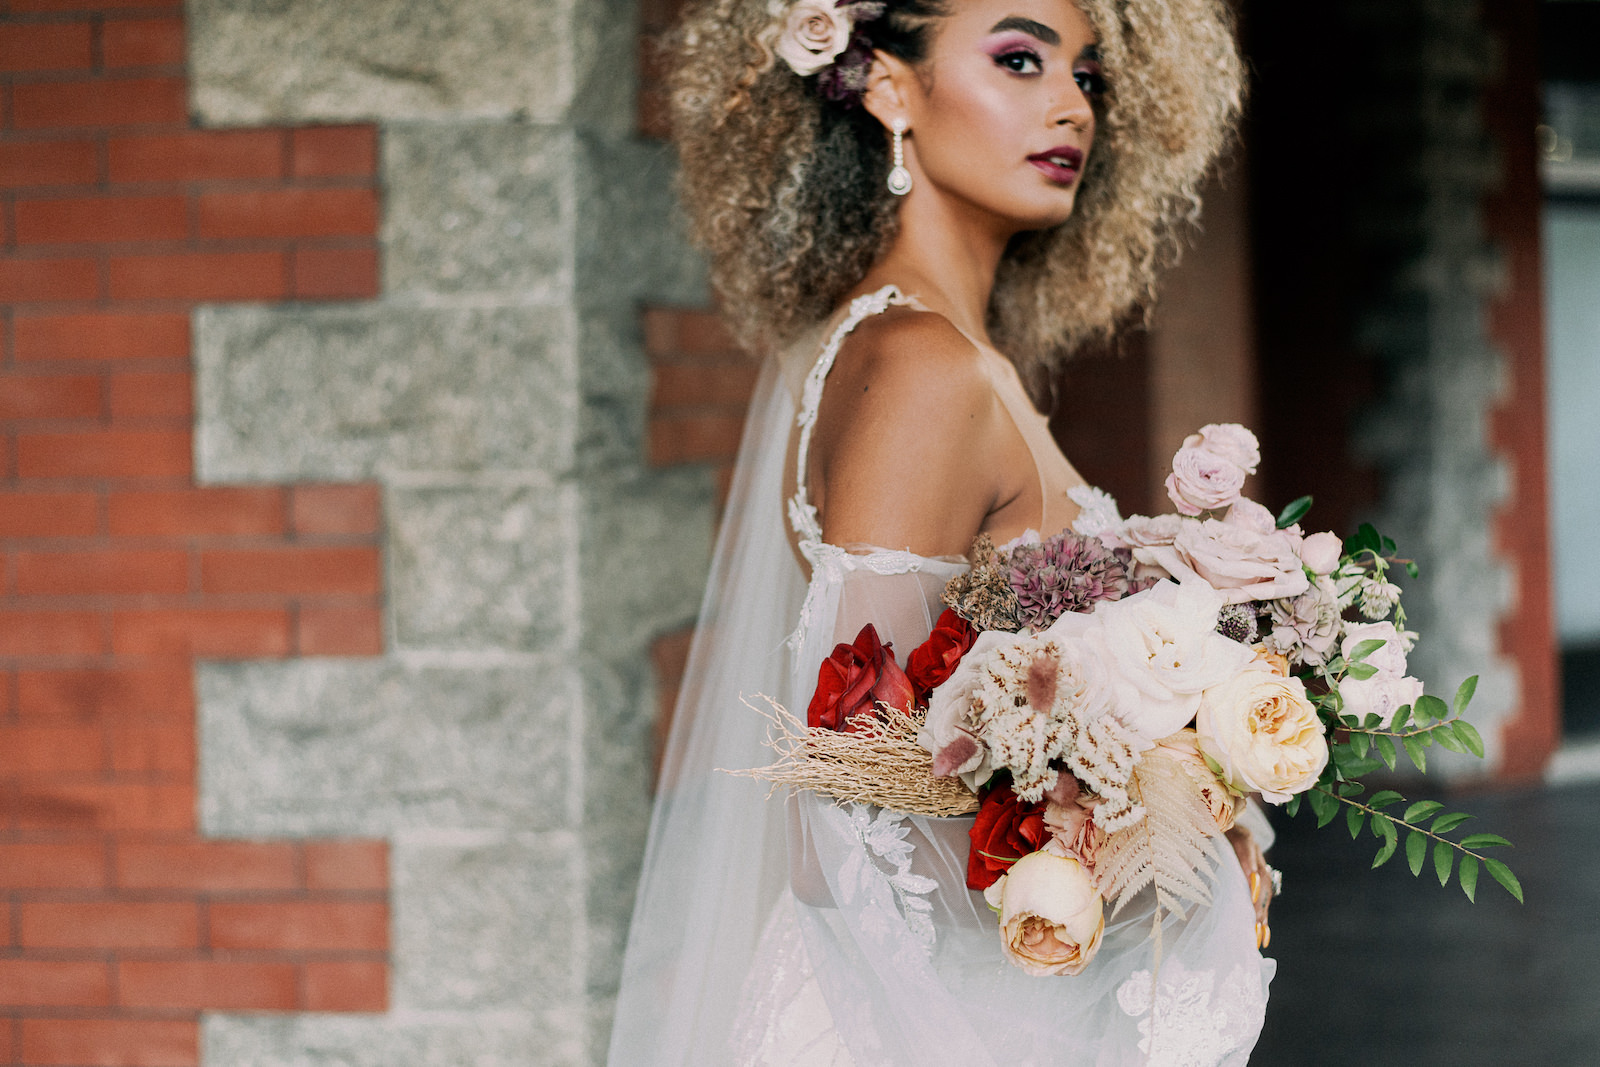 Vintage European Bride Holding Organic Blush Pink, Yellow and Red Roses, Greenery, Dried Leaves Floral Bouquet, Bride Beauty Portrait | Tampa Bay Wedding Photographer Dewitt for Love